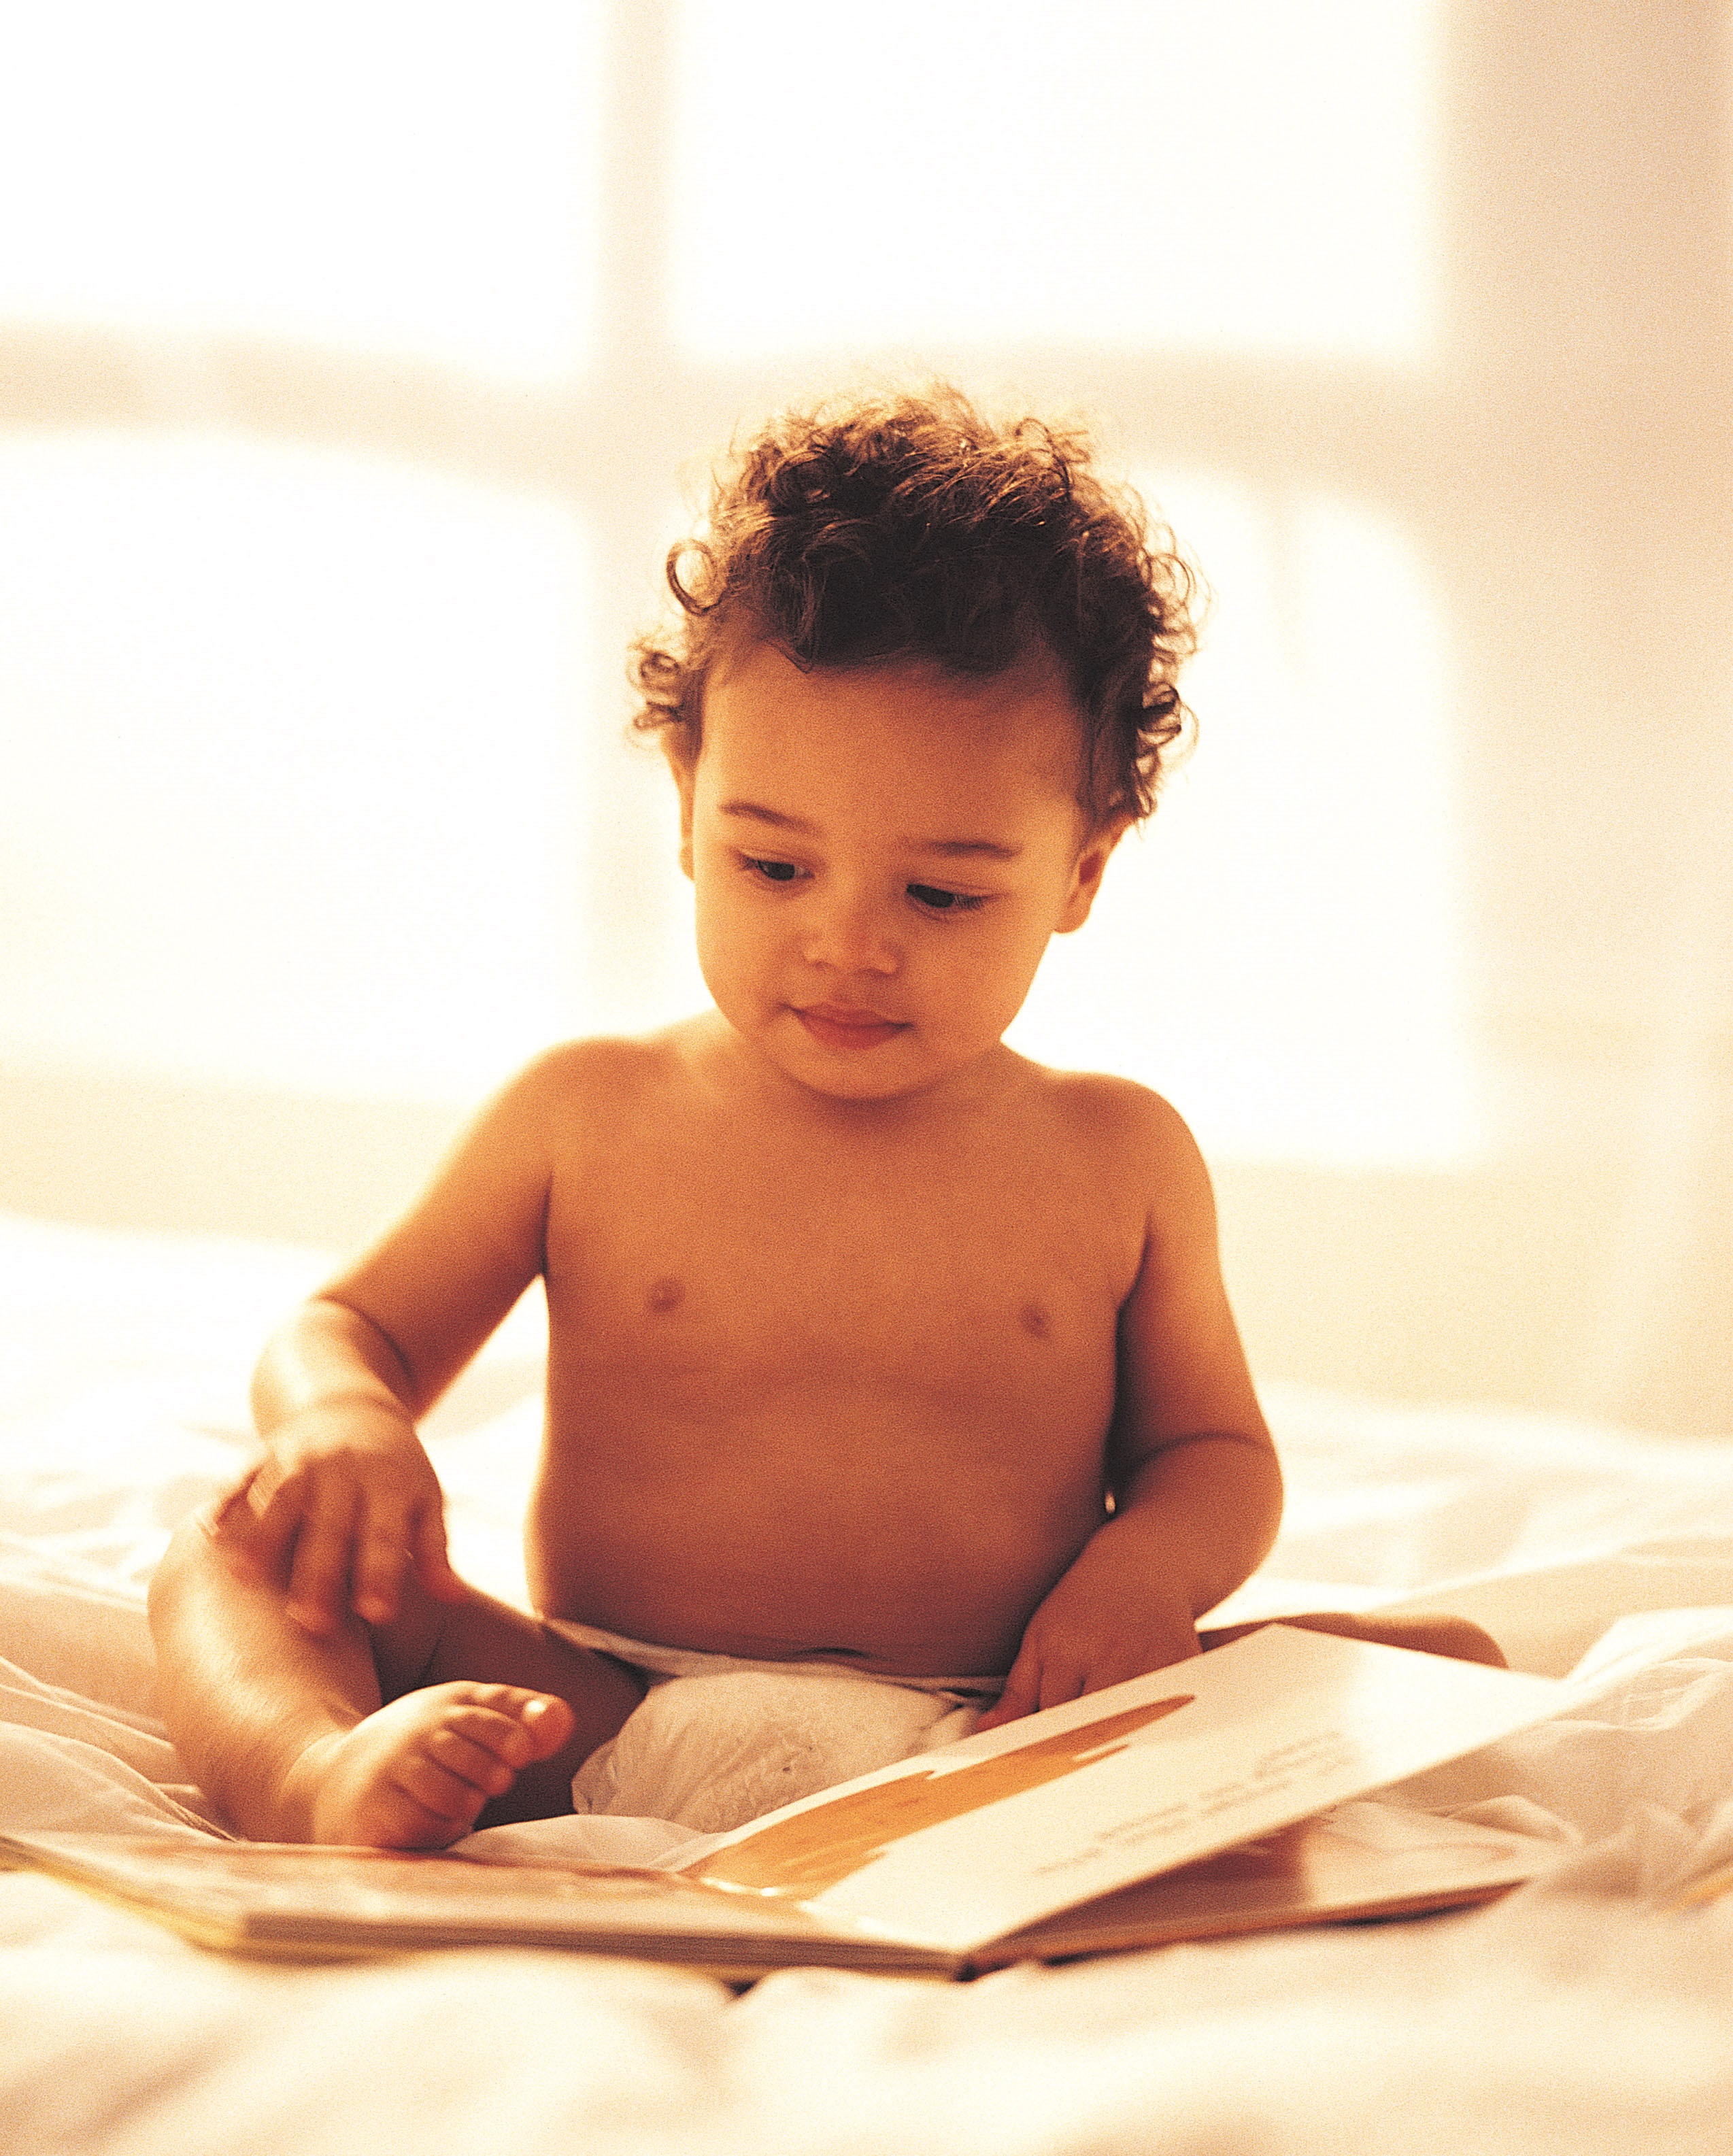 baby boy reading a book on a bed